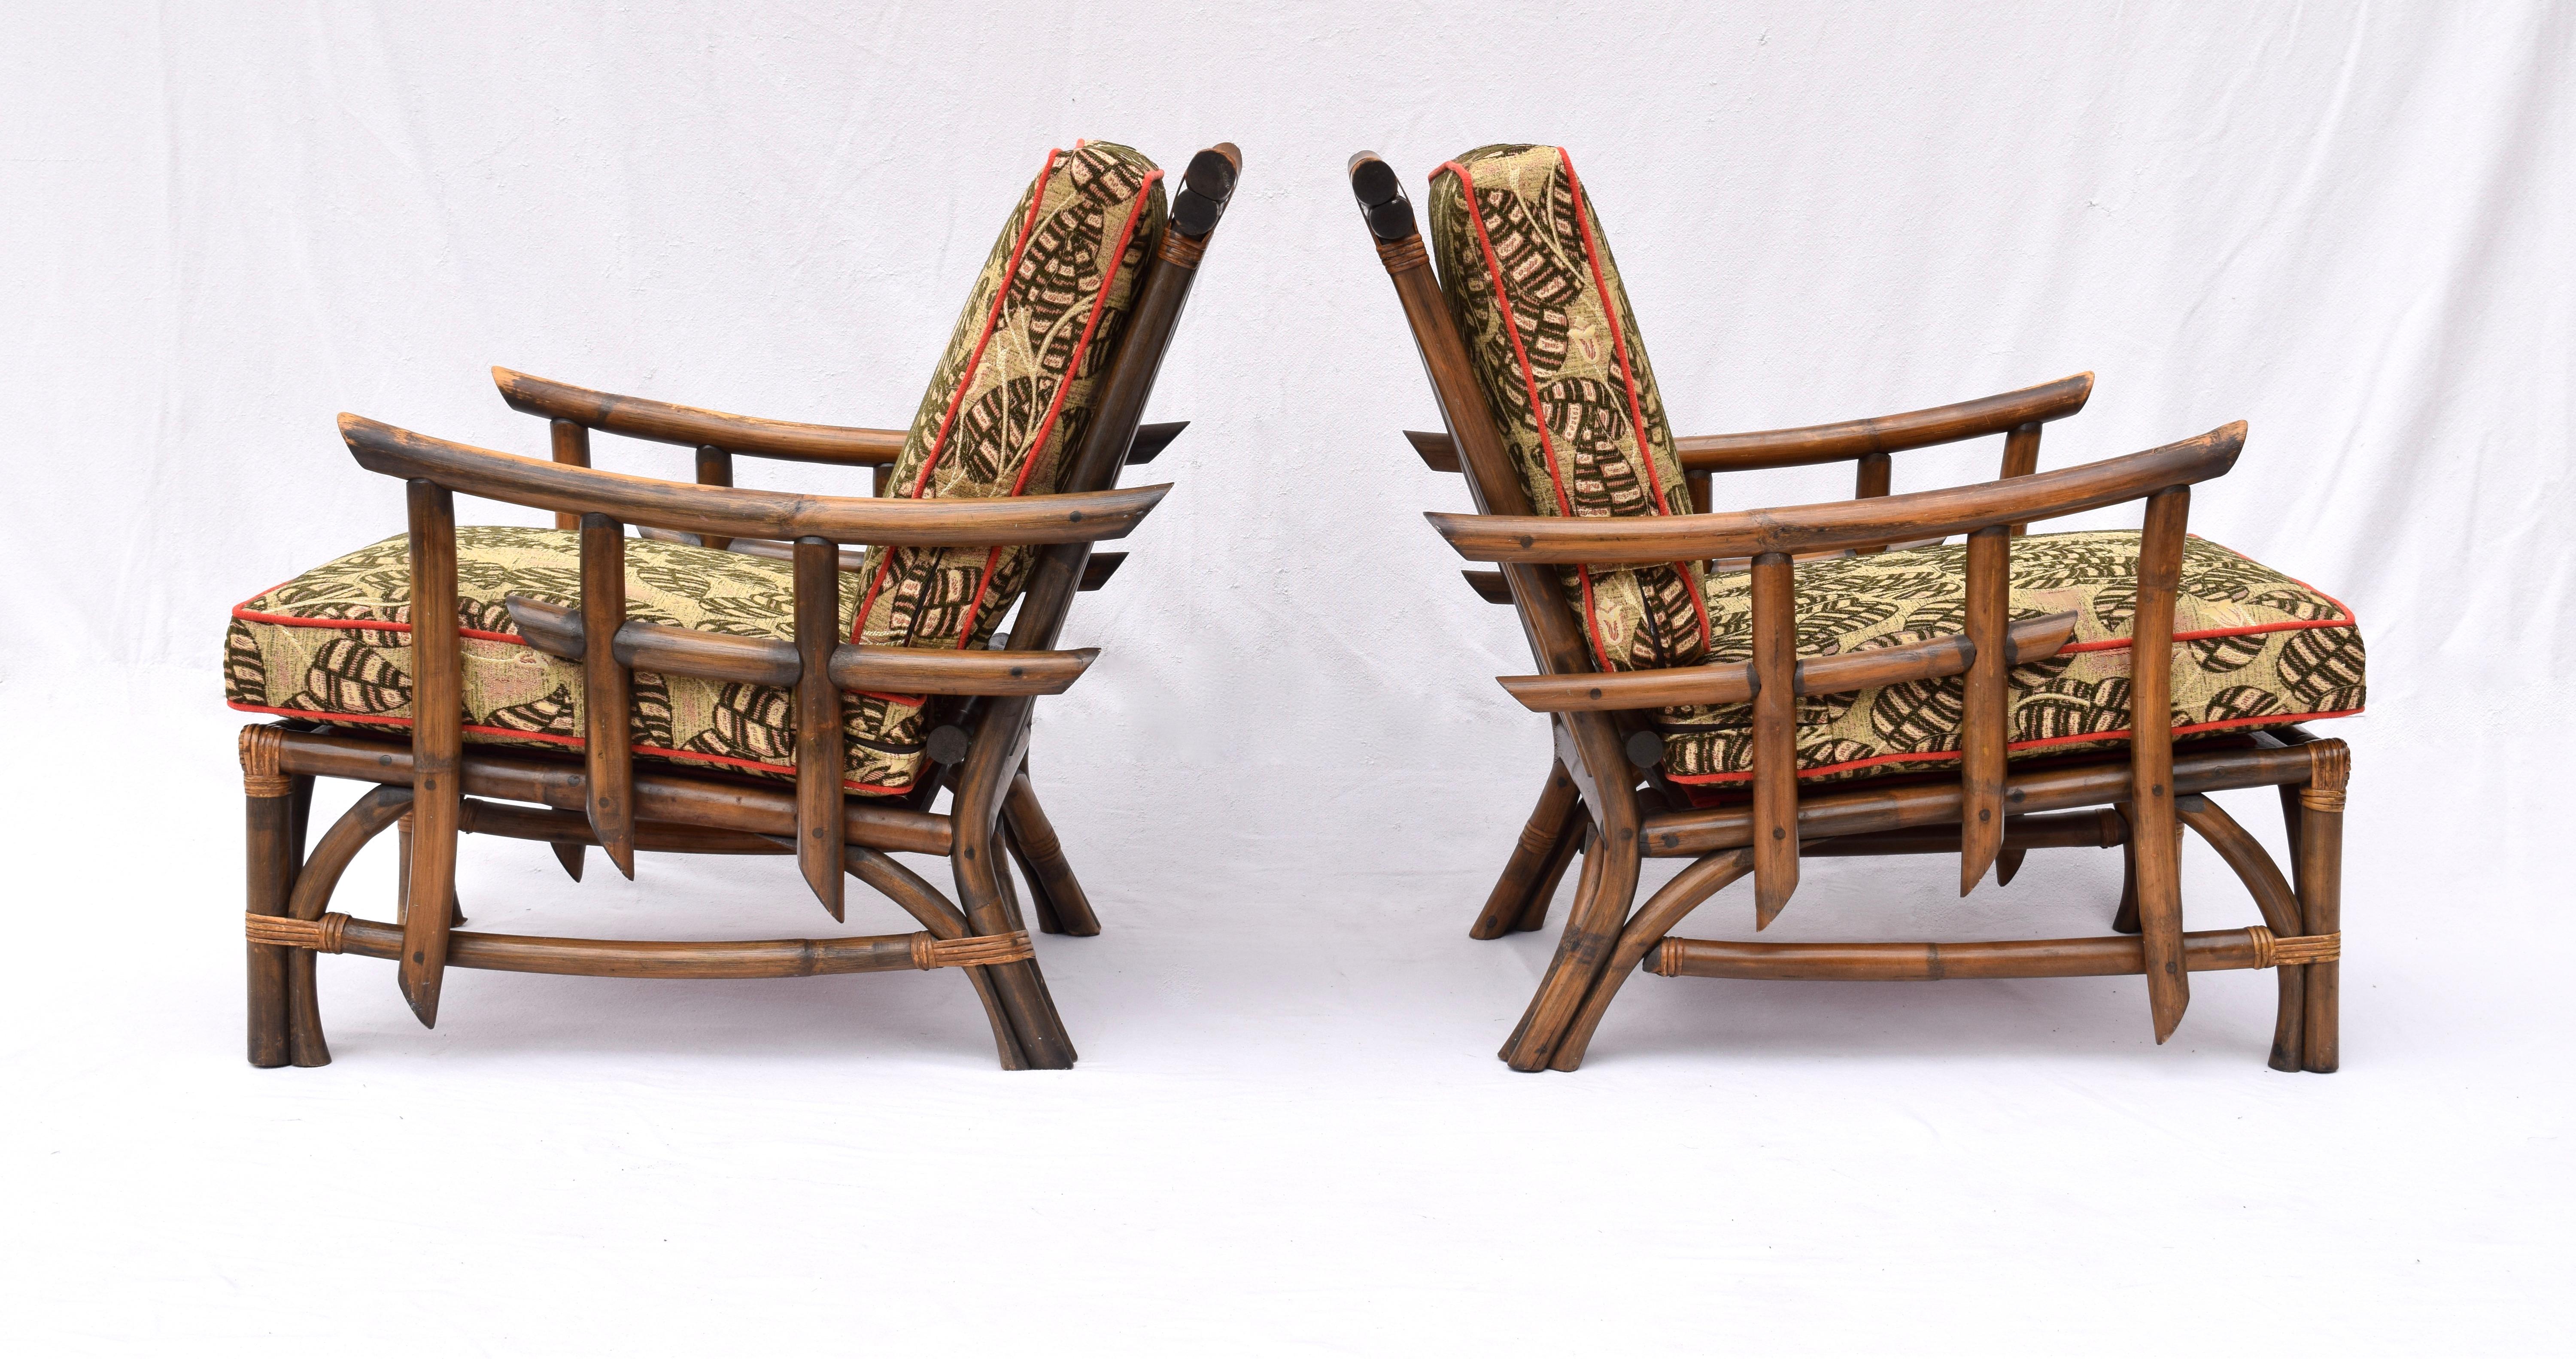 Philippine Pagoda Rattan Chairs Ottoman Set In The Manner of John Wisner Ficks Reed